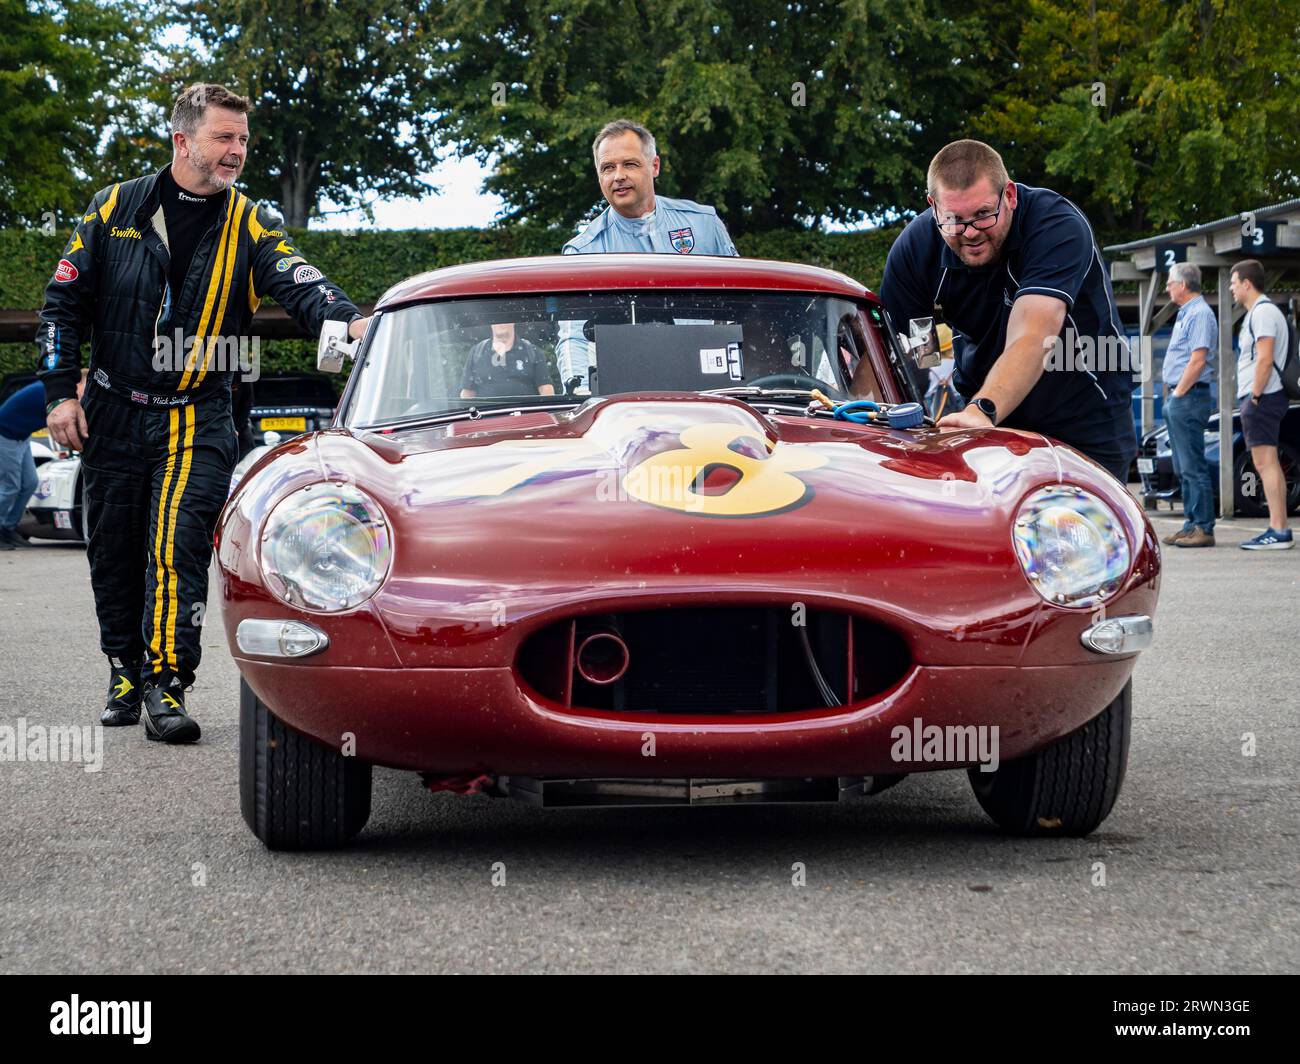 Andy Priaulx and Nick Swift pushing a racing E type Jaguar on a testing day at the Goodwood motor racing circuit, West Sussex UK 2023 Stock Photo